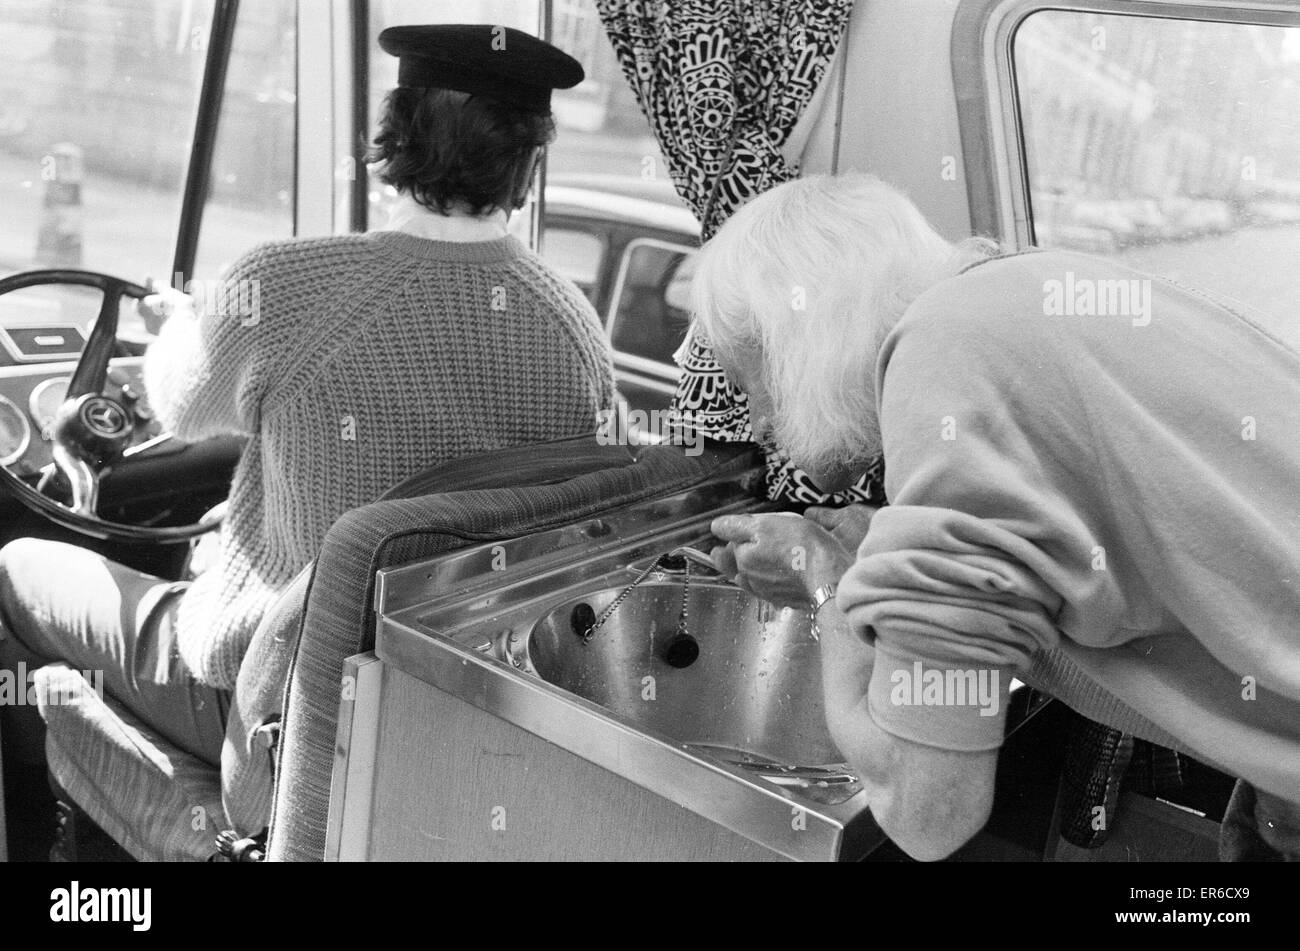 'A day in the life of Jimmy Saville' Feature by Mike Hellicar.  Here he is pictured in his caravan motor home with driver Dennis Garbutt.  7th October 1971. Stock Photo